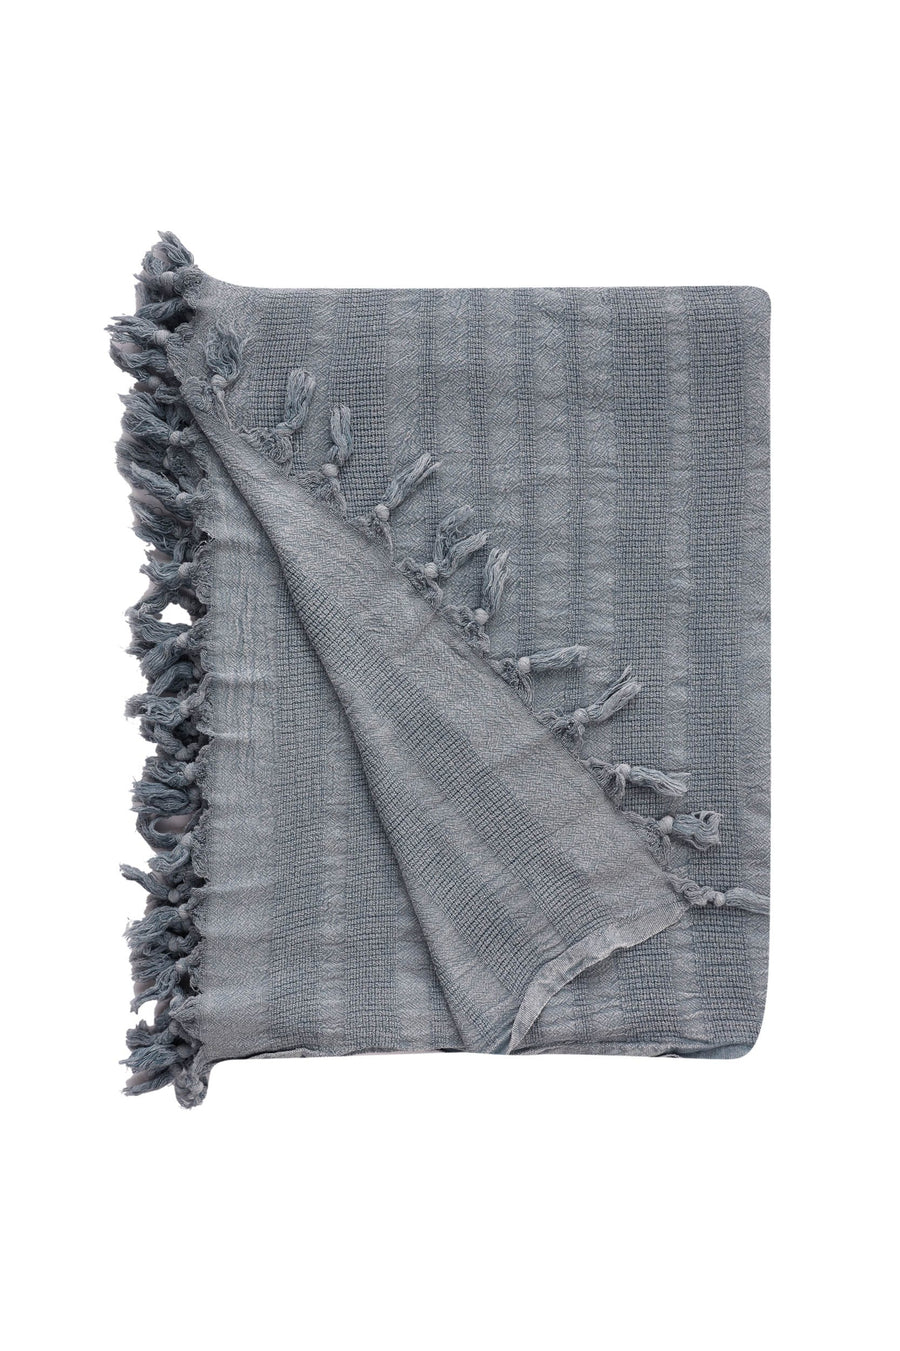 Rhye Dyed Cotton Bed Blanket - Grey